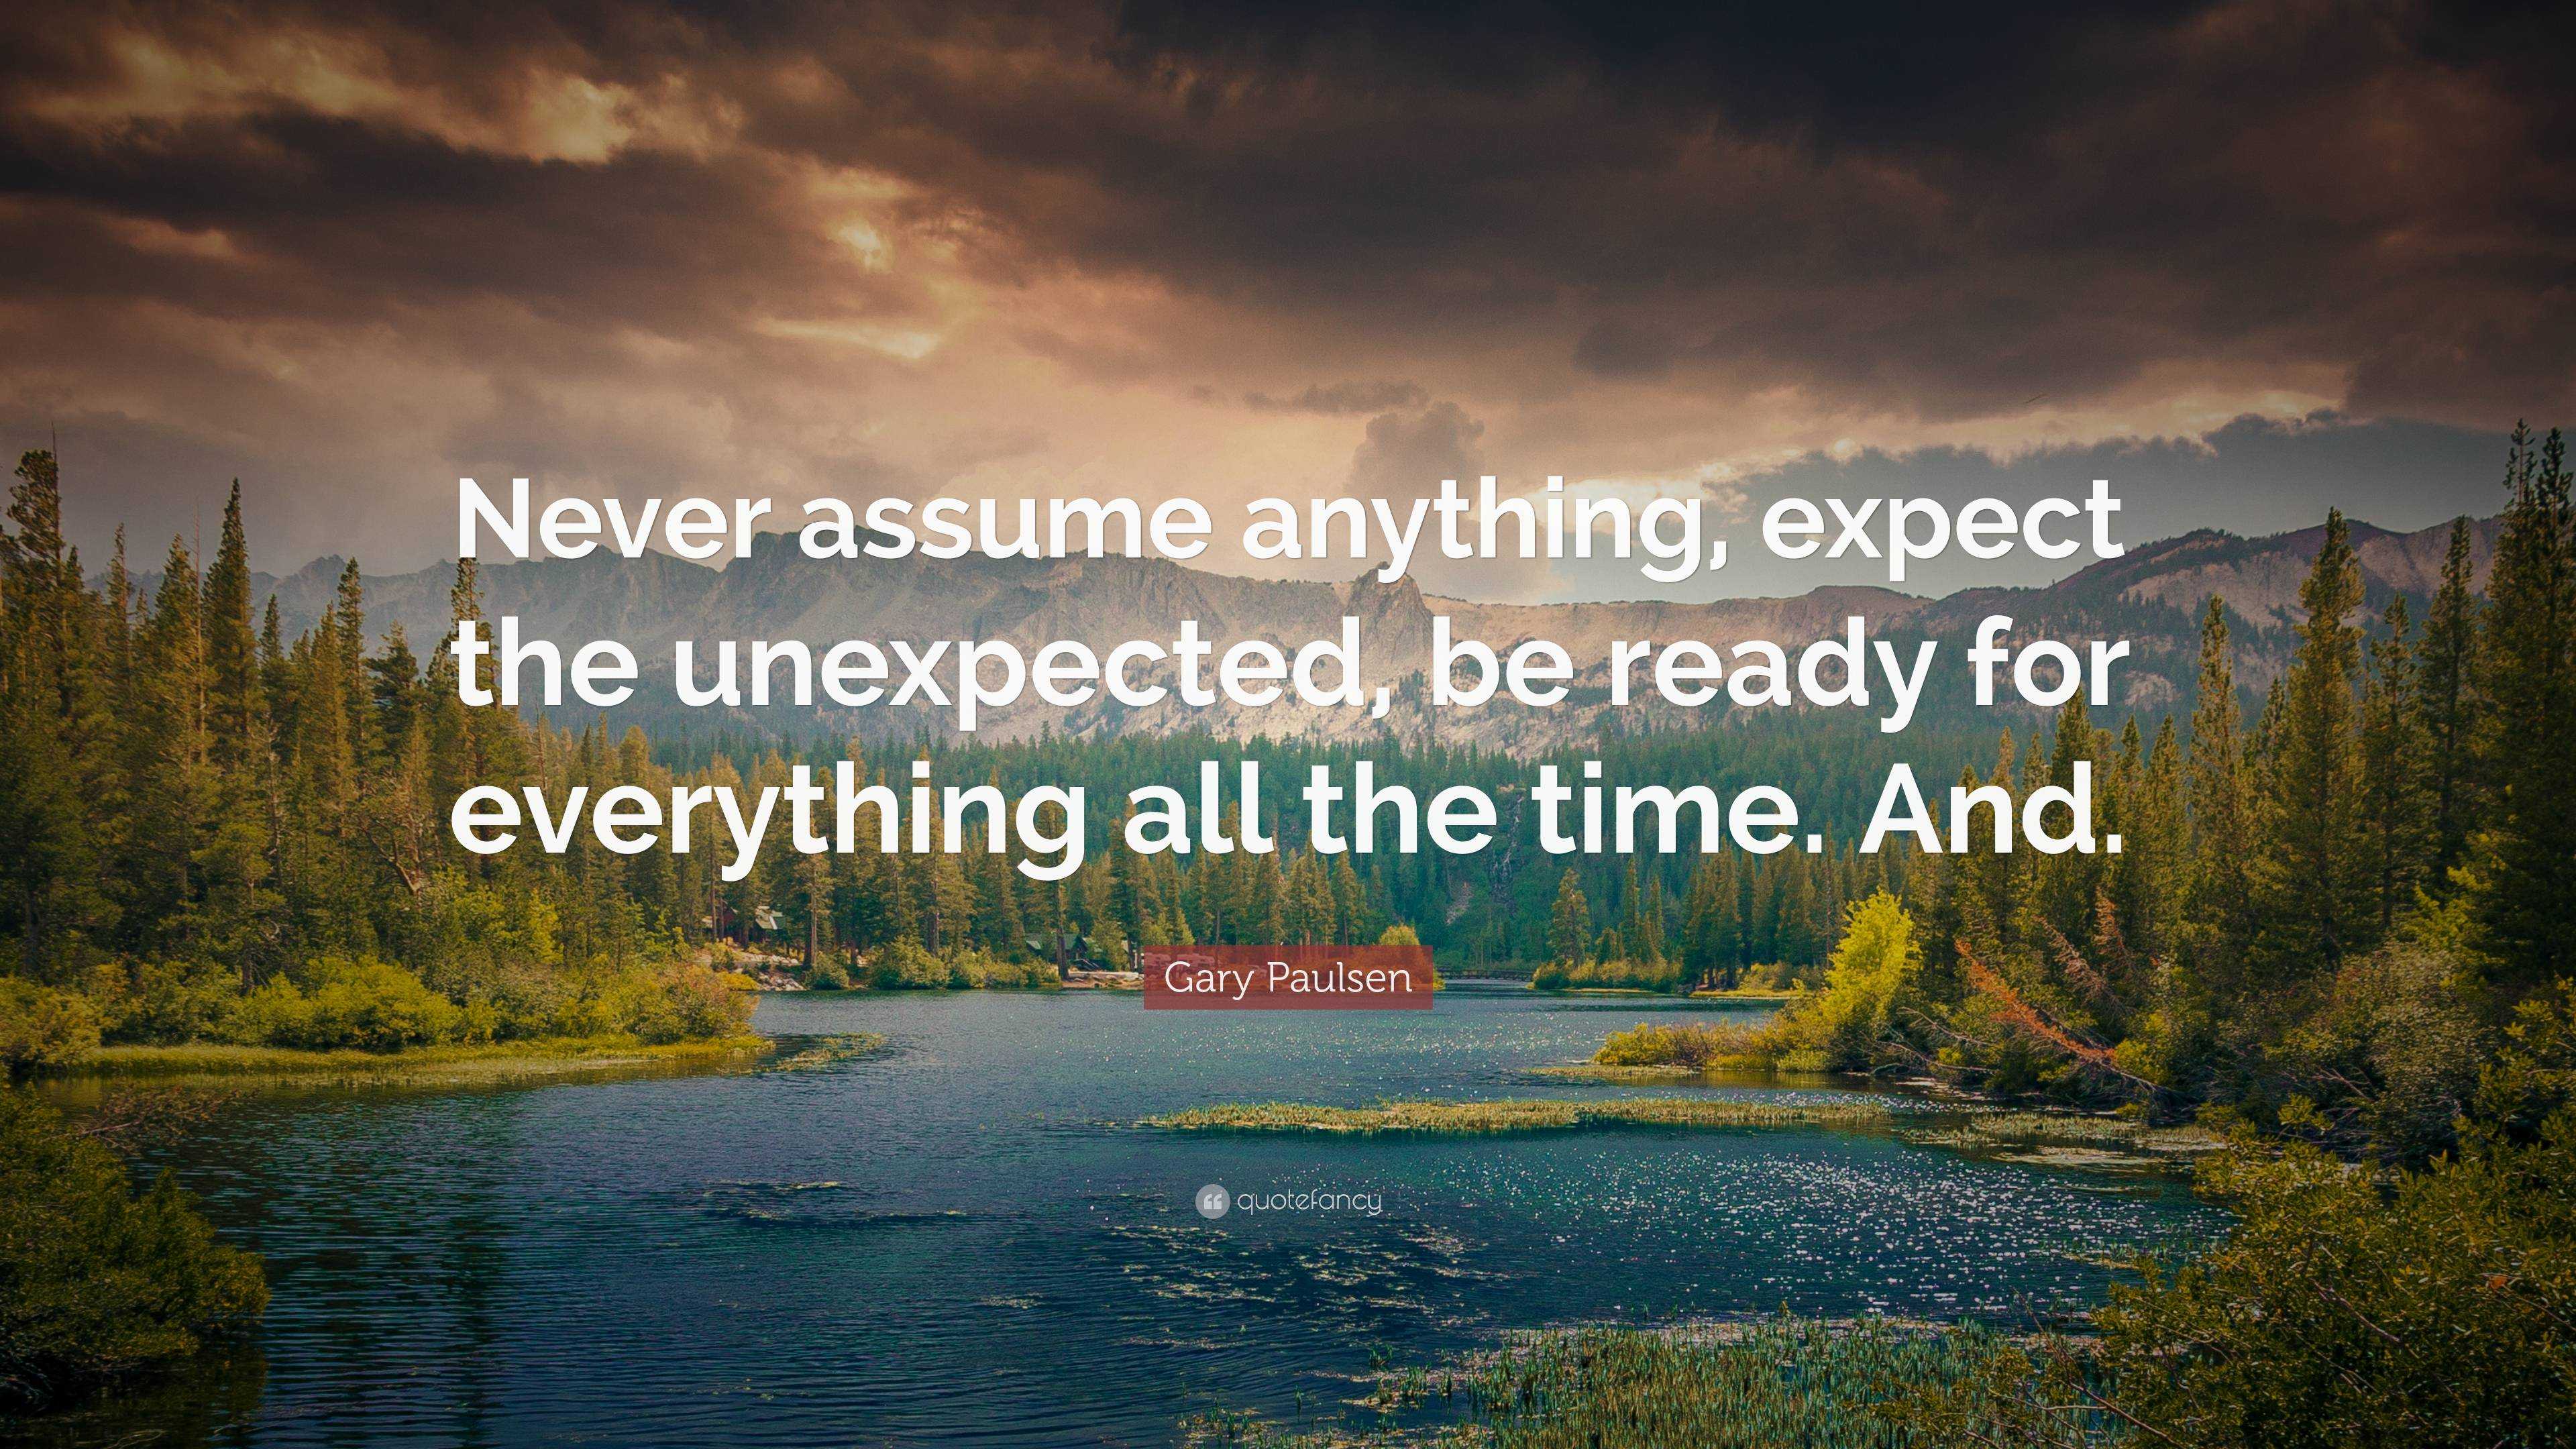 Gary Paulsen Quote: “Never assume anything, expect the unexpected, be ...